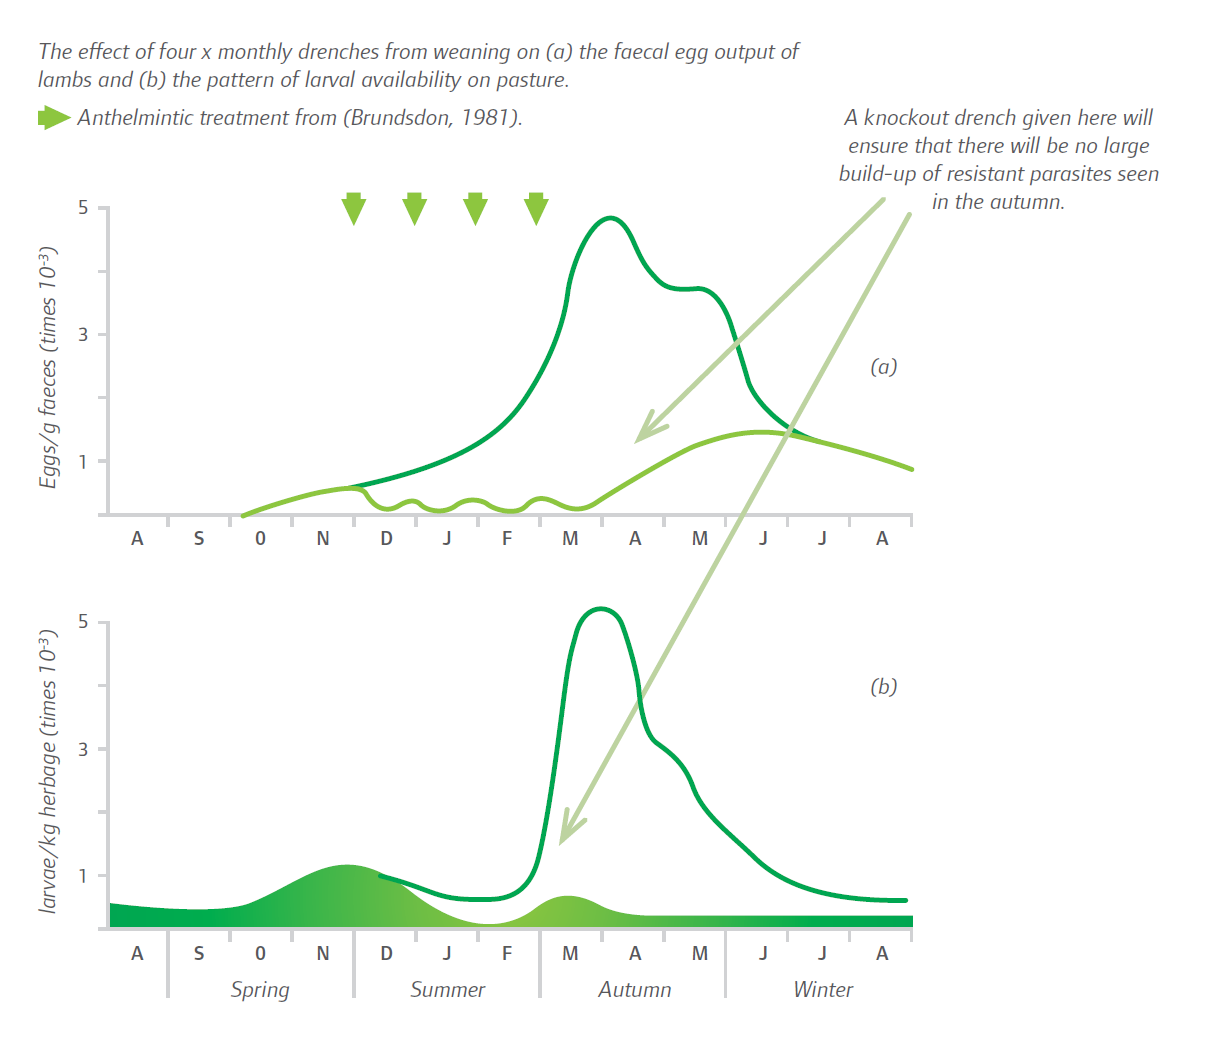 Graph showing when to use knockout drench in lambs to prevent autumnal larvae peak